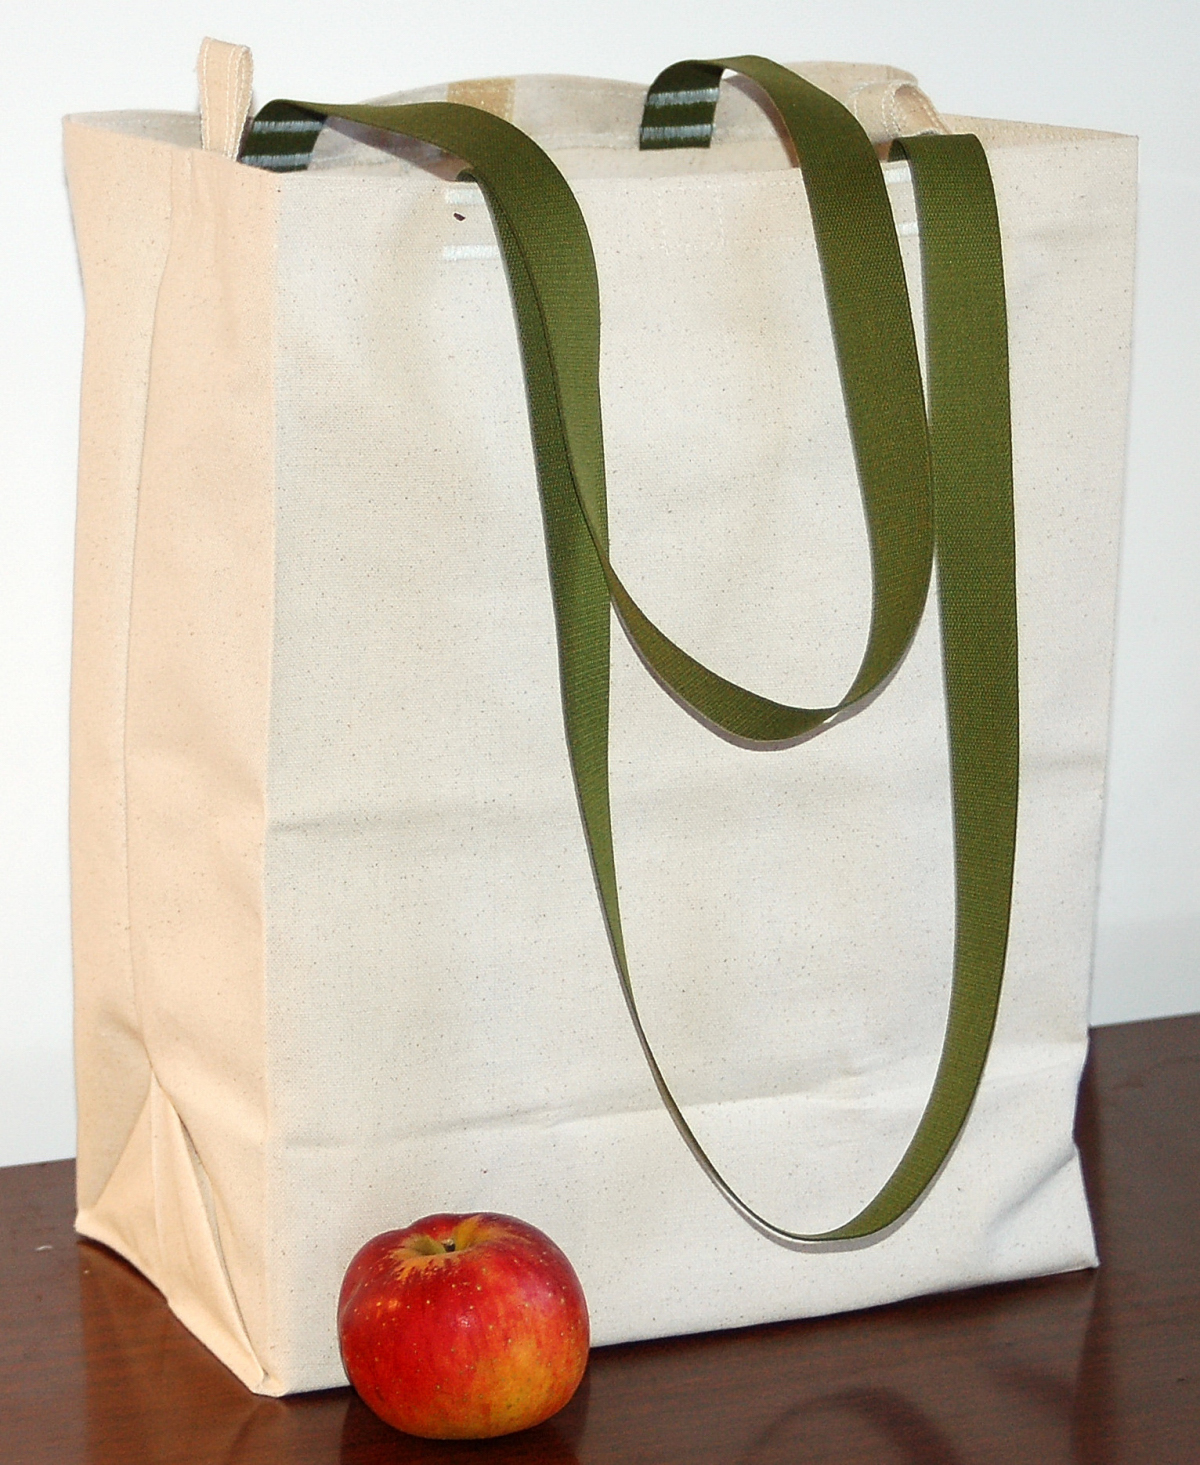 Canvas Grocery & Shopping Tote Bag Eco-Friendly Reusable in USA Turtlecreek 